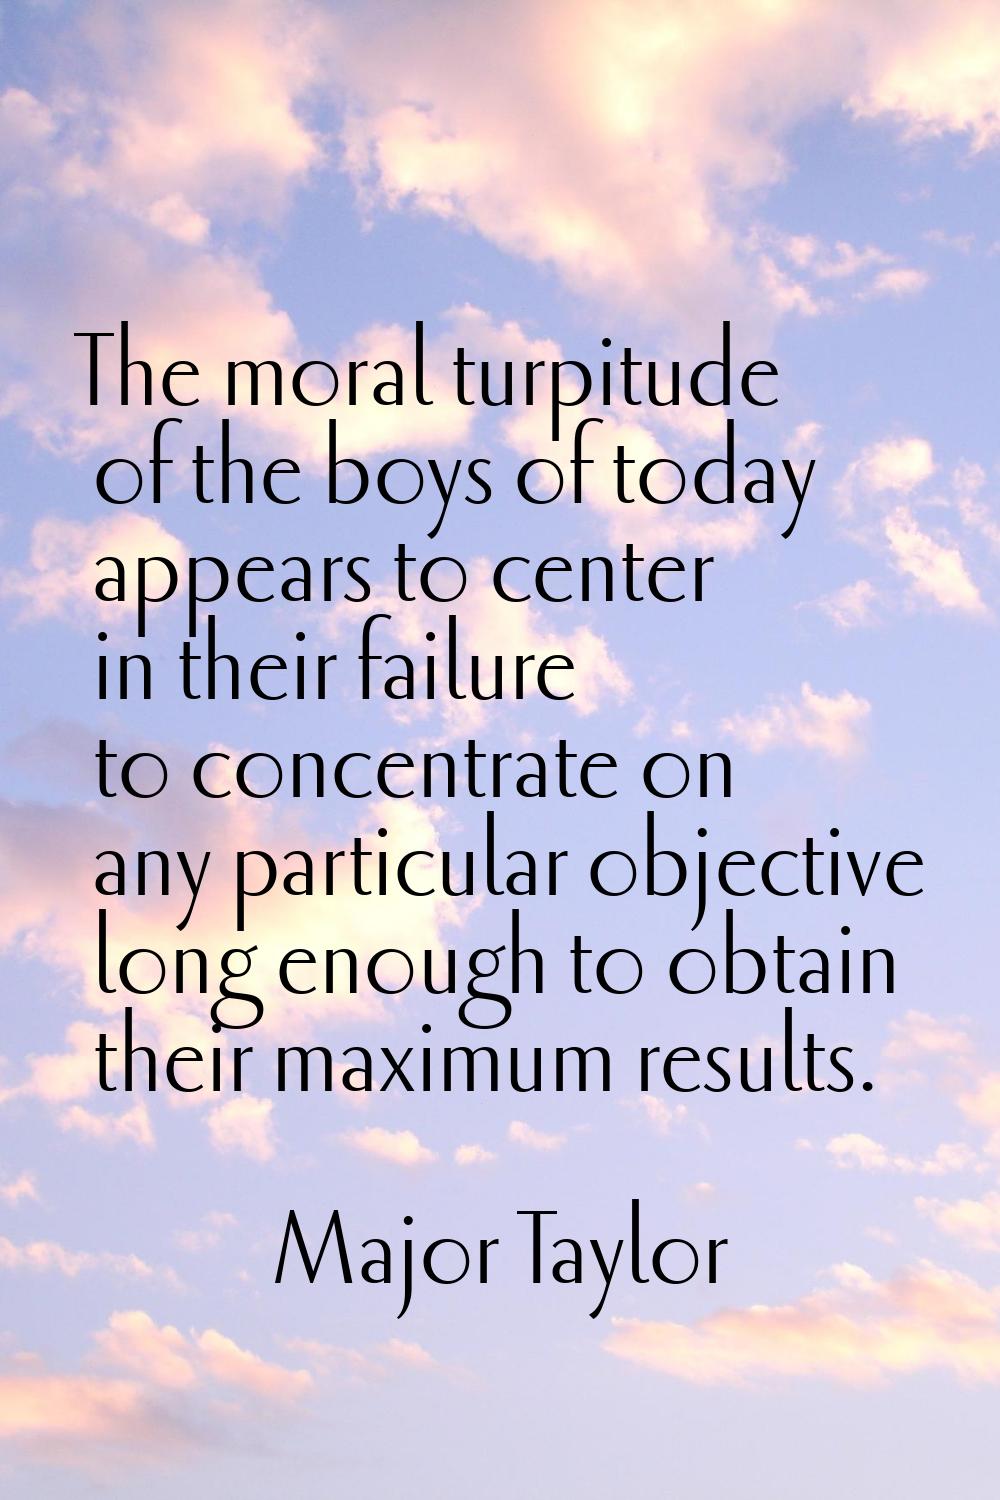 The moral turpitude of the boys of today appears to center in their failure to concentrate on any p